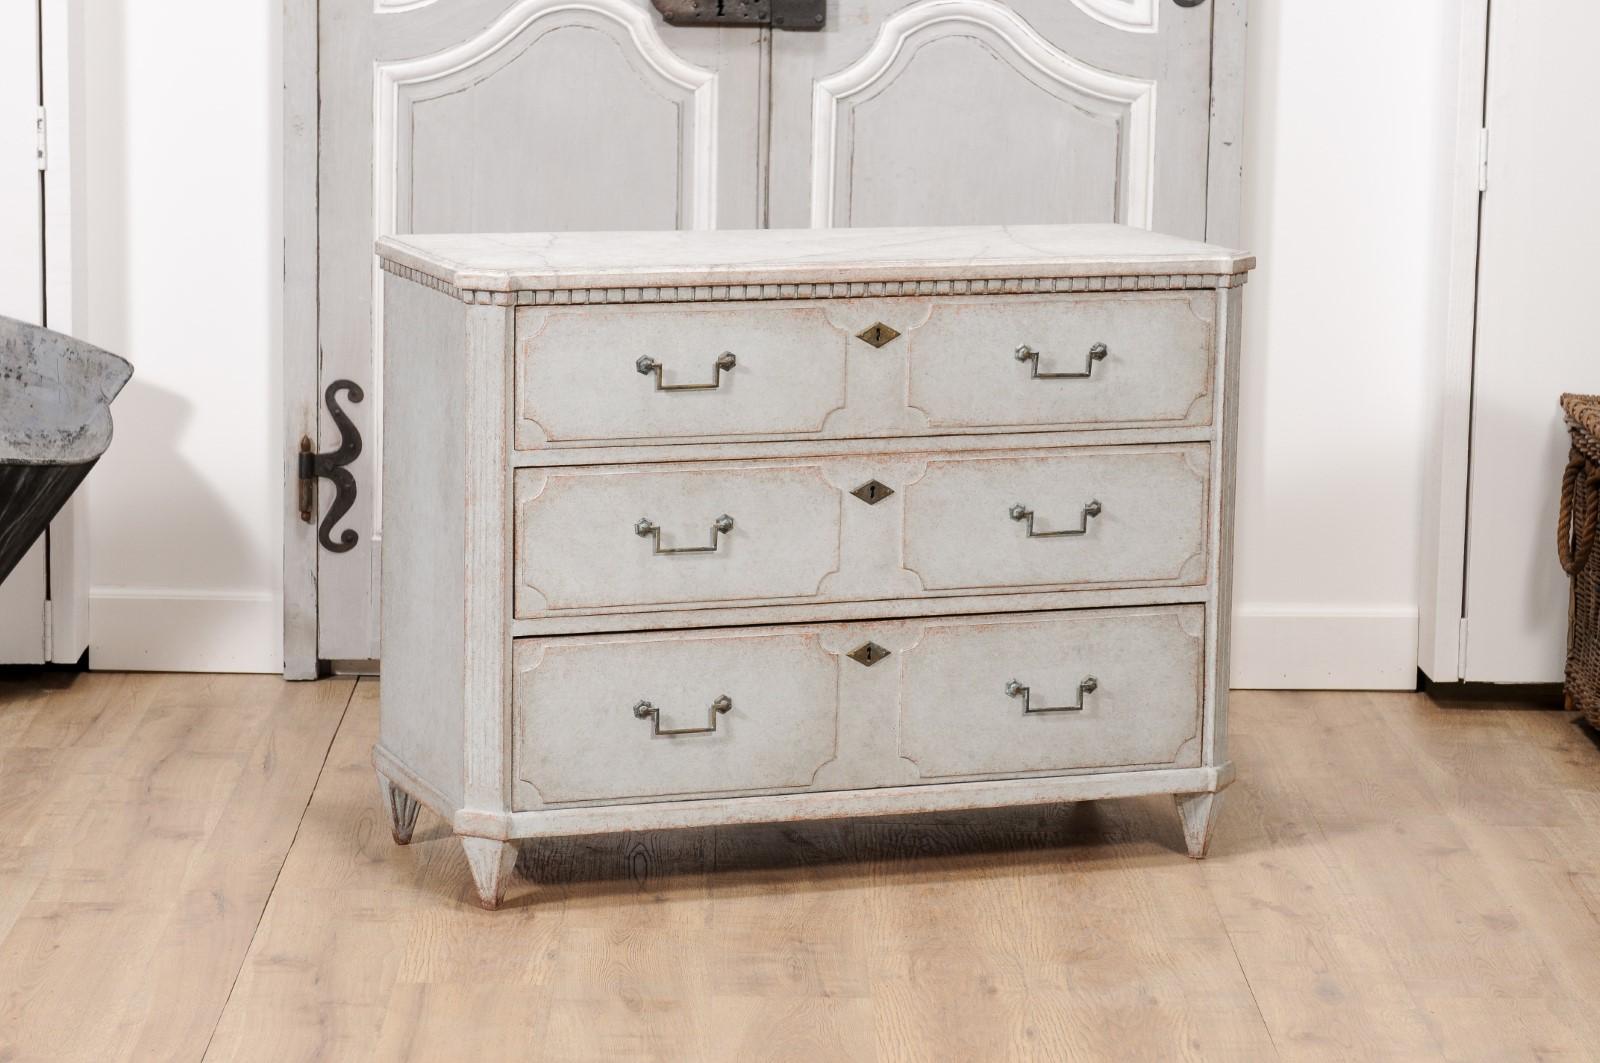 A Swedish Gustavian style painted wood chest from circa 1860 with marbleized top, carved dentil molding, three drawers, low-relief cartouches, fluted side posts and short tapered feet. This Swedish Gustavian style painted wood chest from circa 1860,